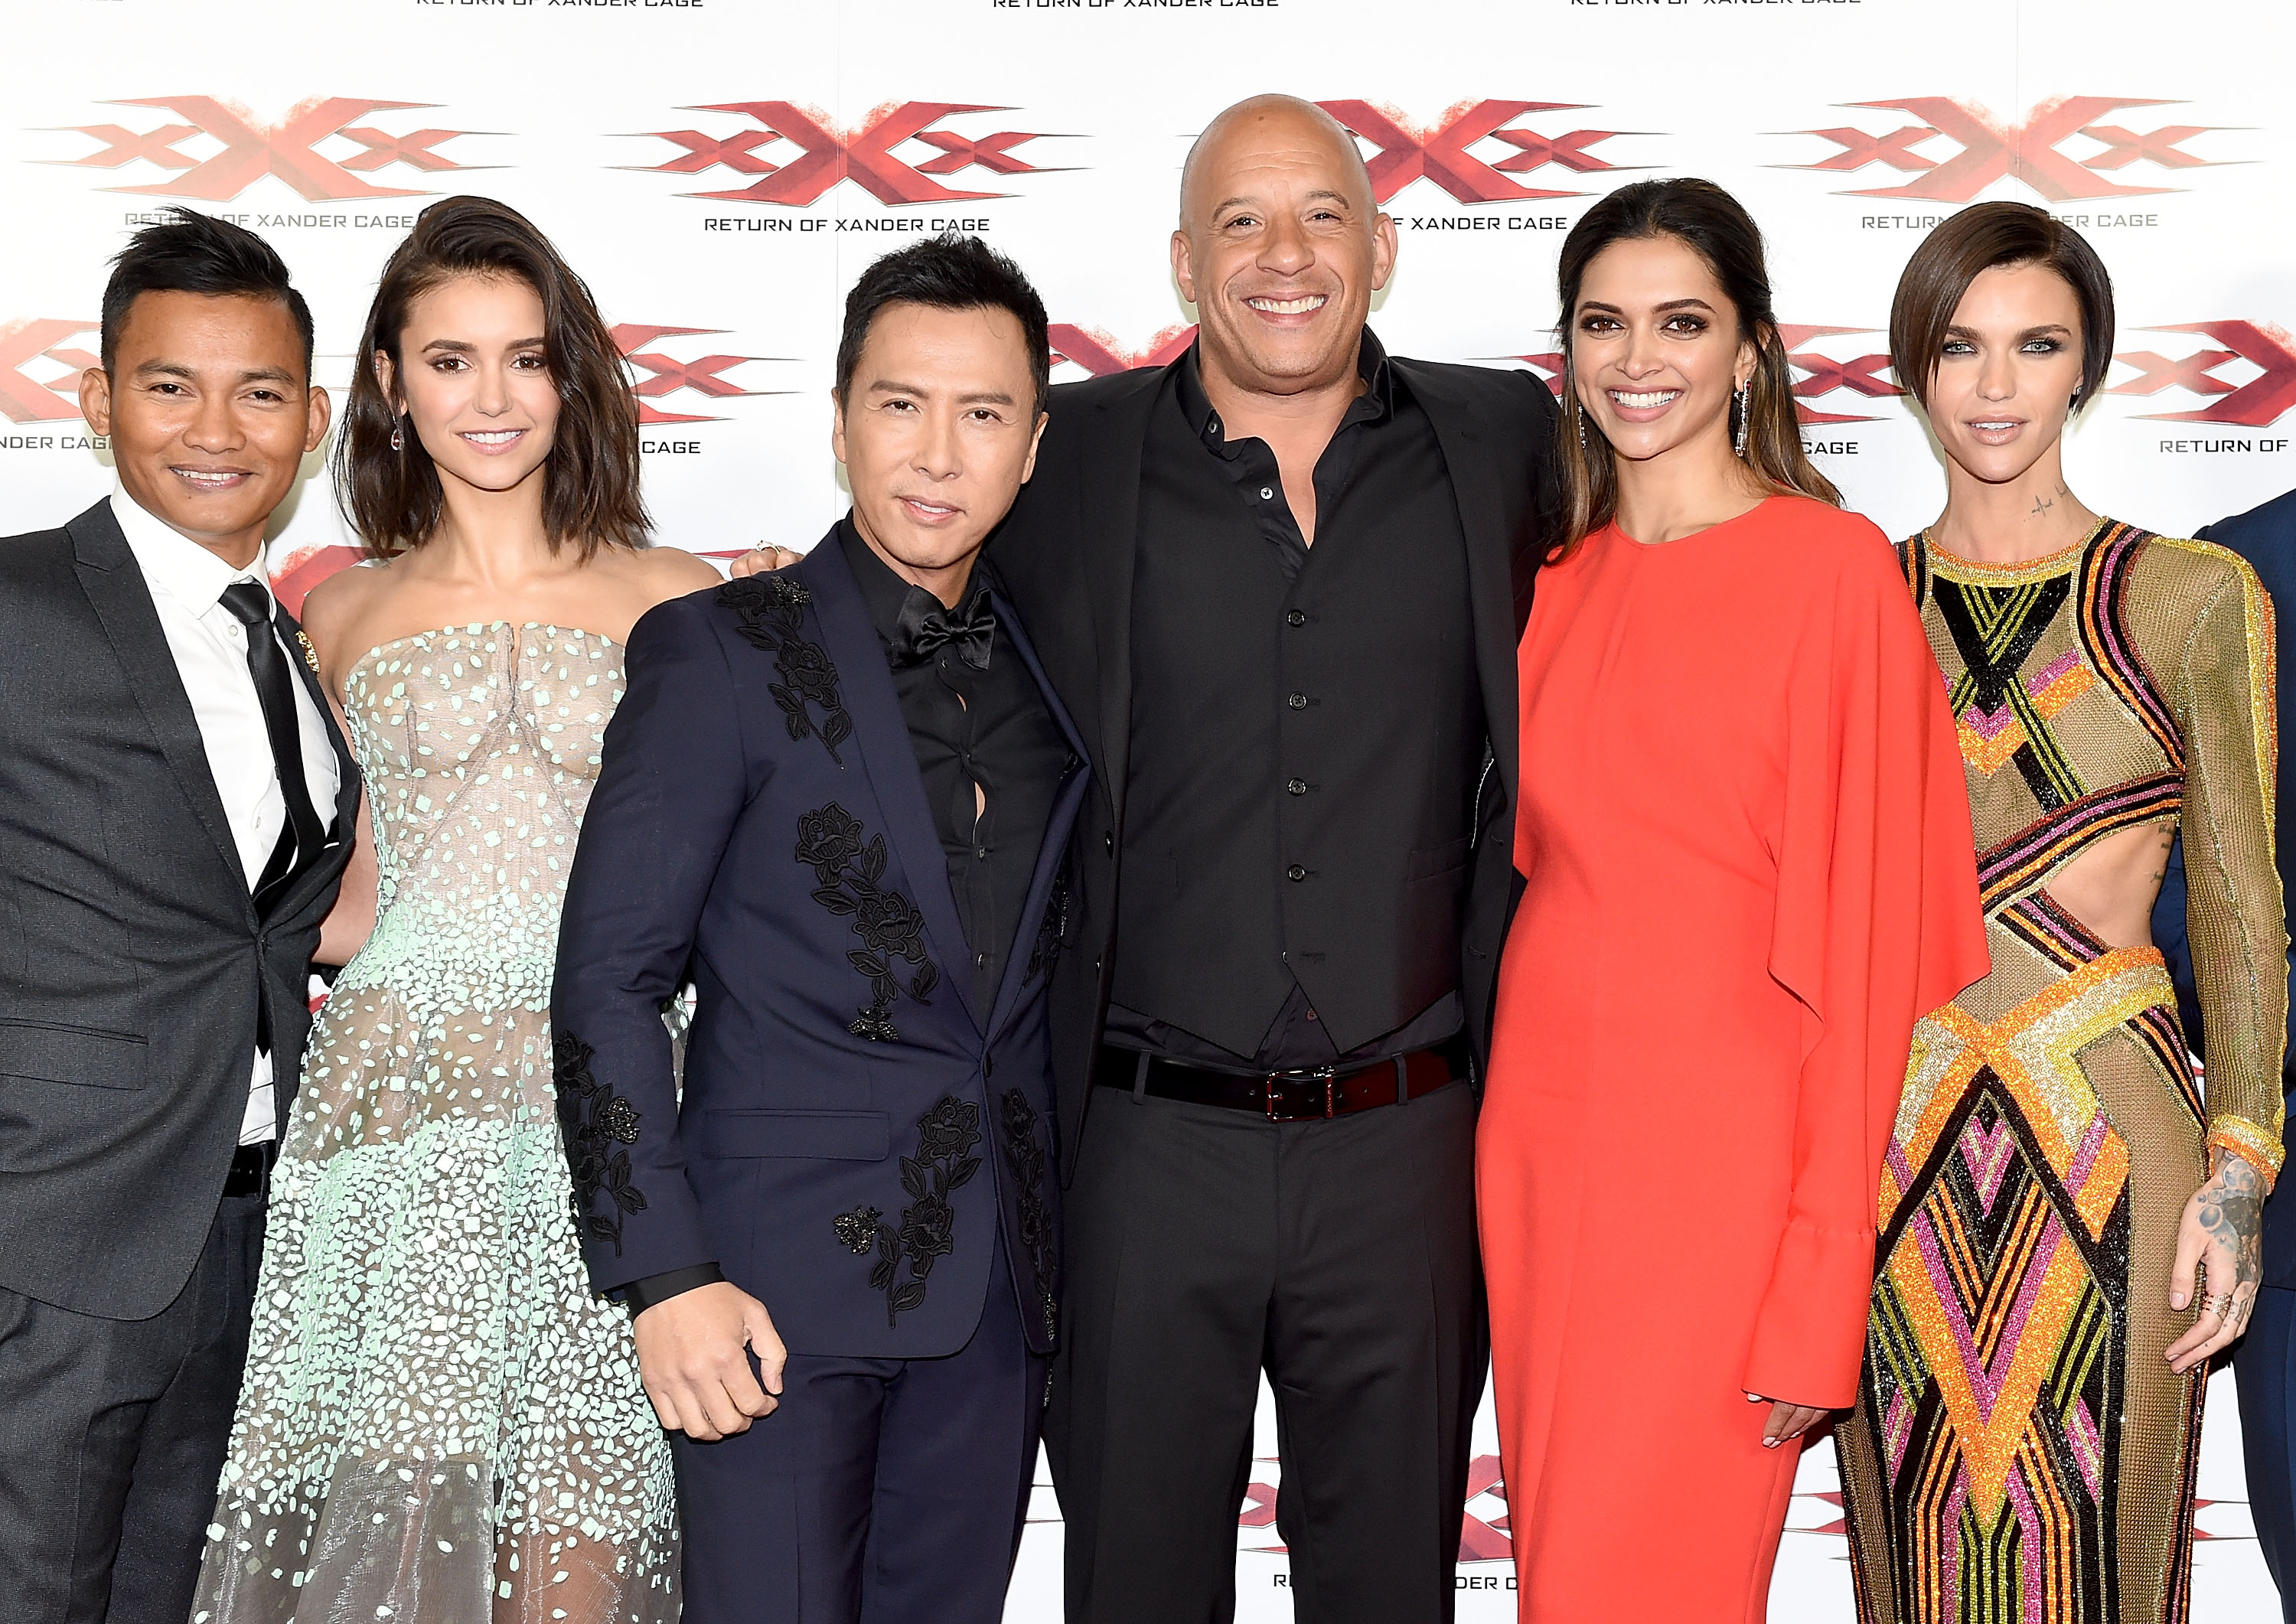 LONDON, ENGLAND - JANUARY 10: (L-R) Tony Jaa, Nina Dobrev, Donnie Yen, Vin Diesel, Deepika Padukone and Ruby Rose attend the European Premiere of Paramount Pictures' 